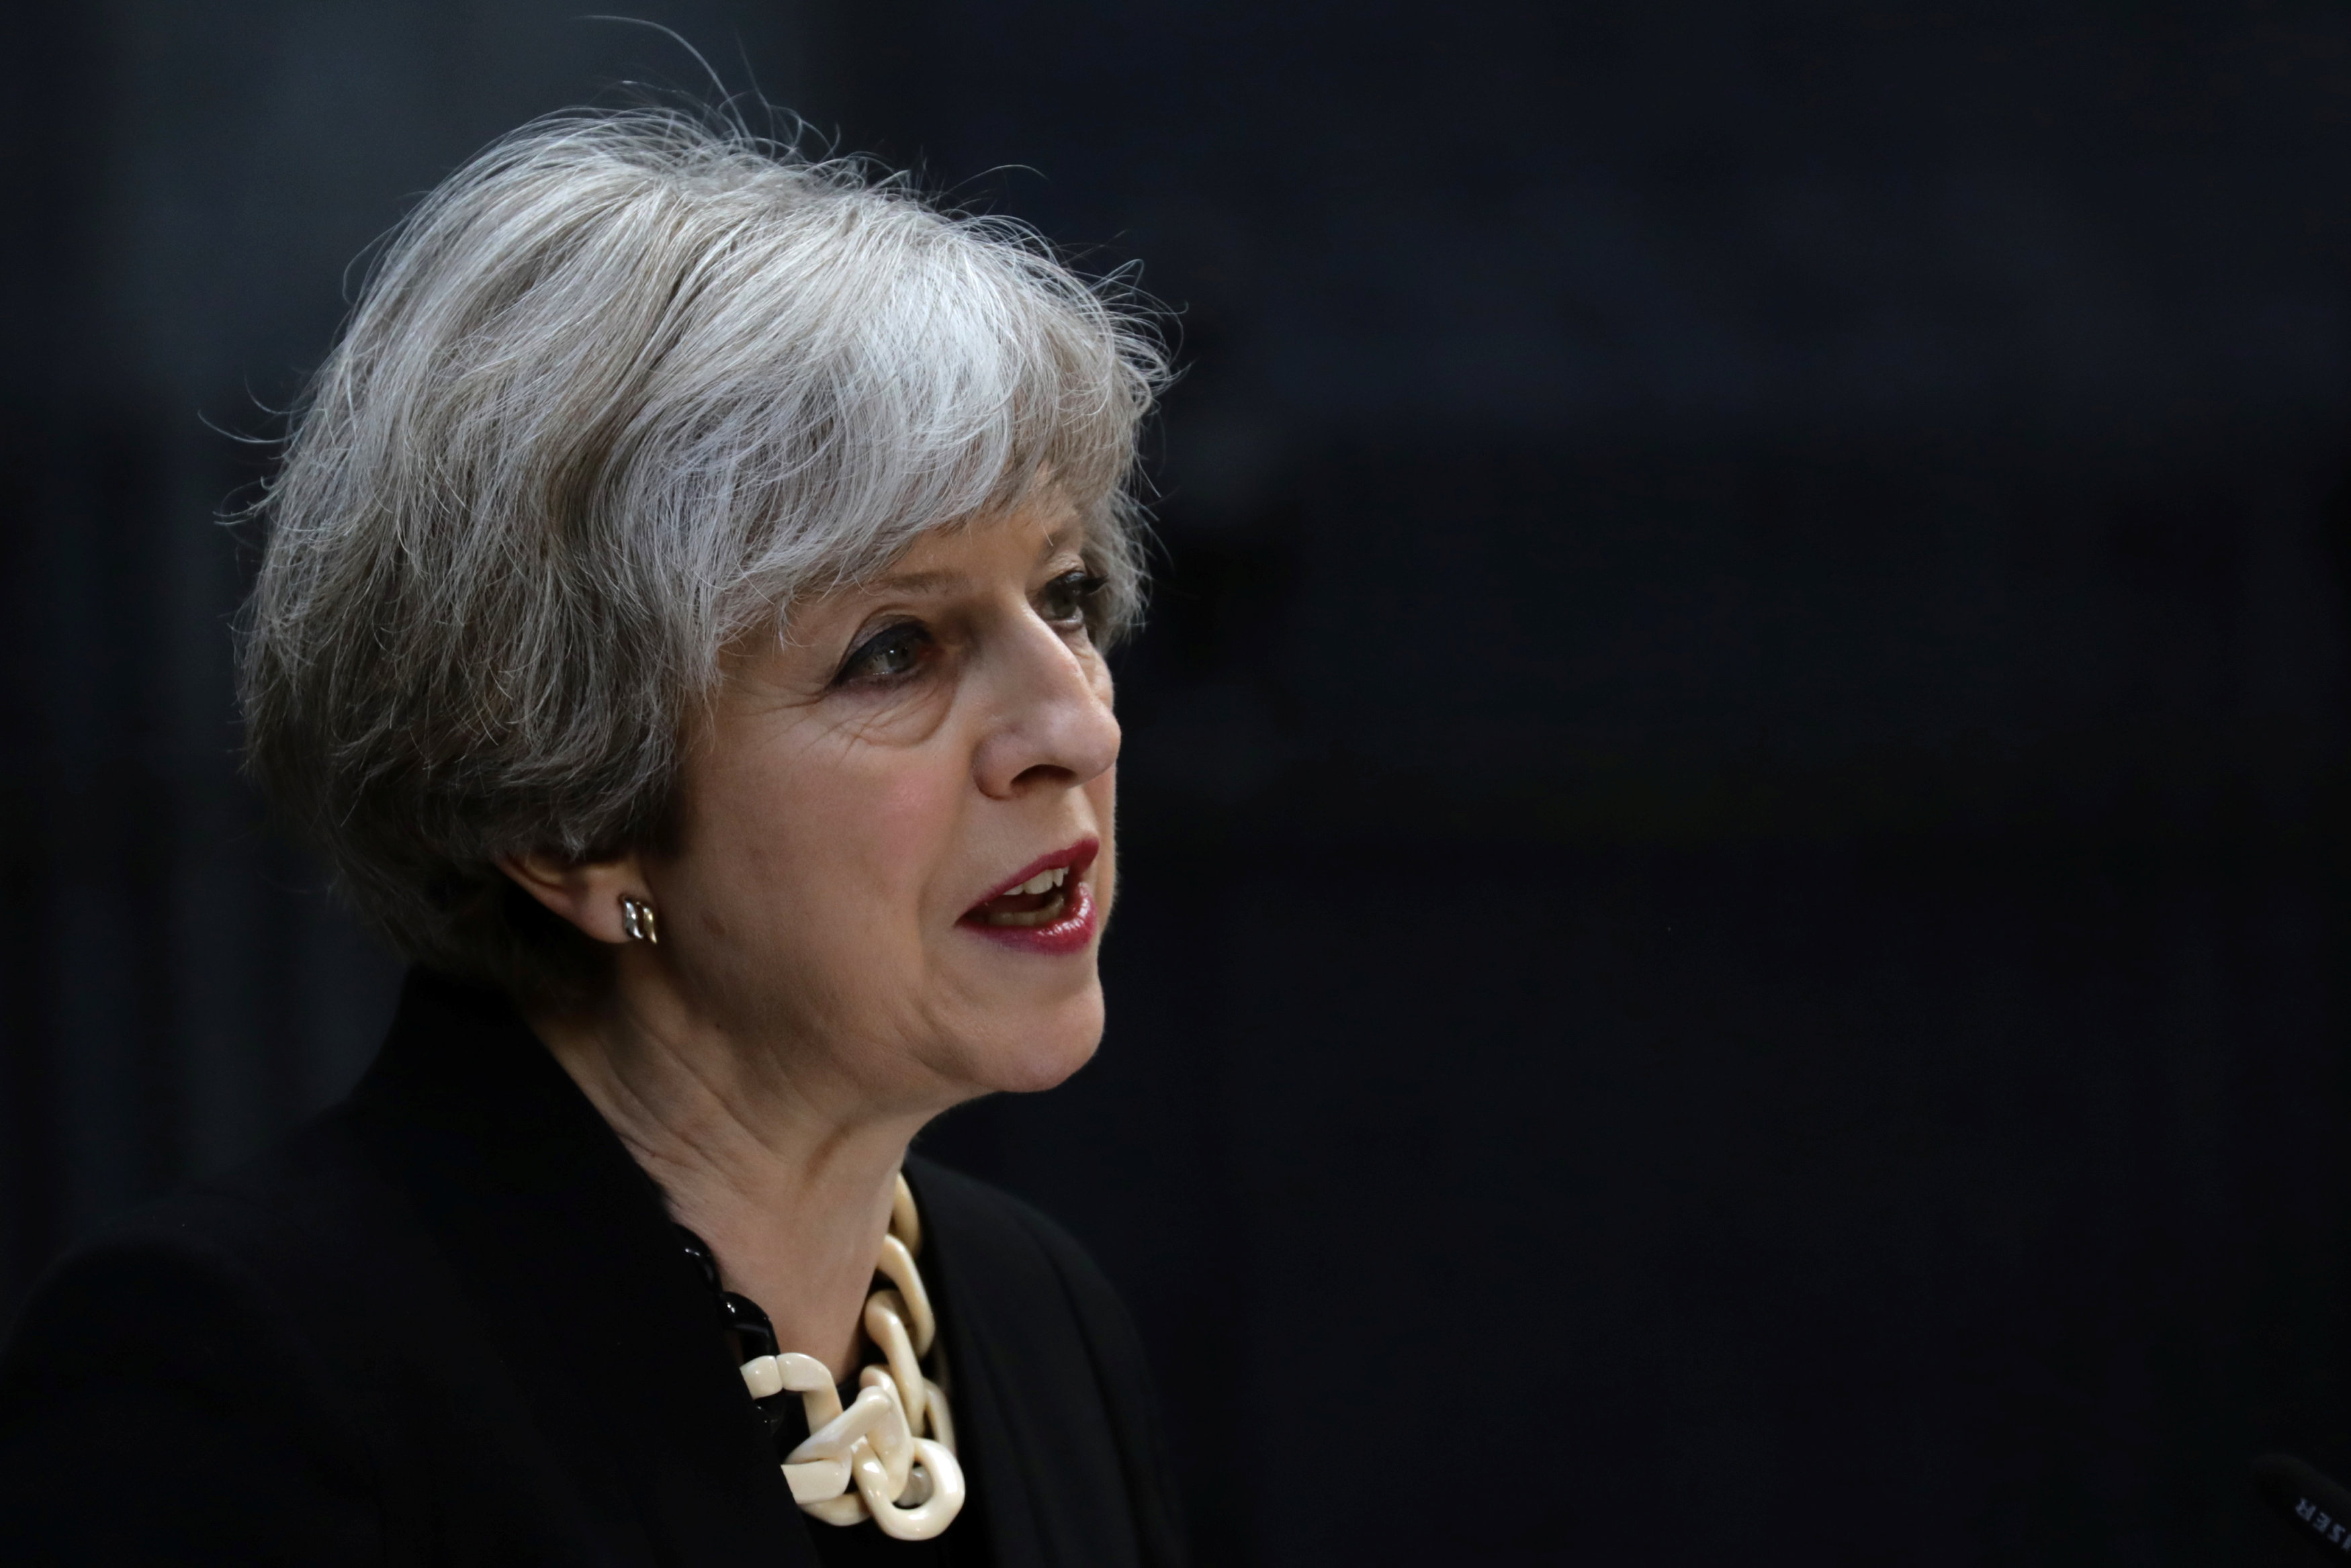 May calls for beefed up terror response after London attack